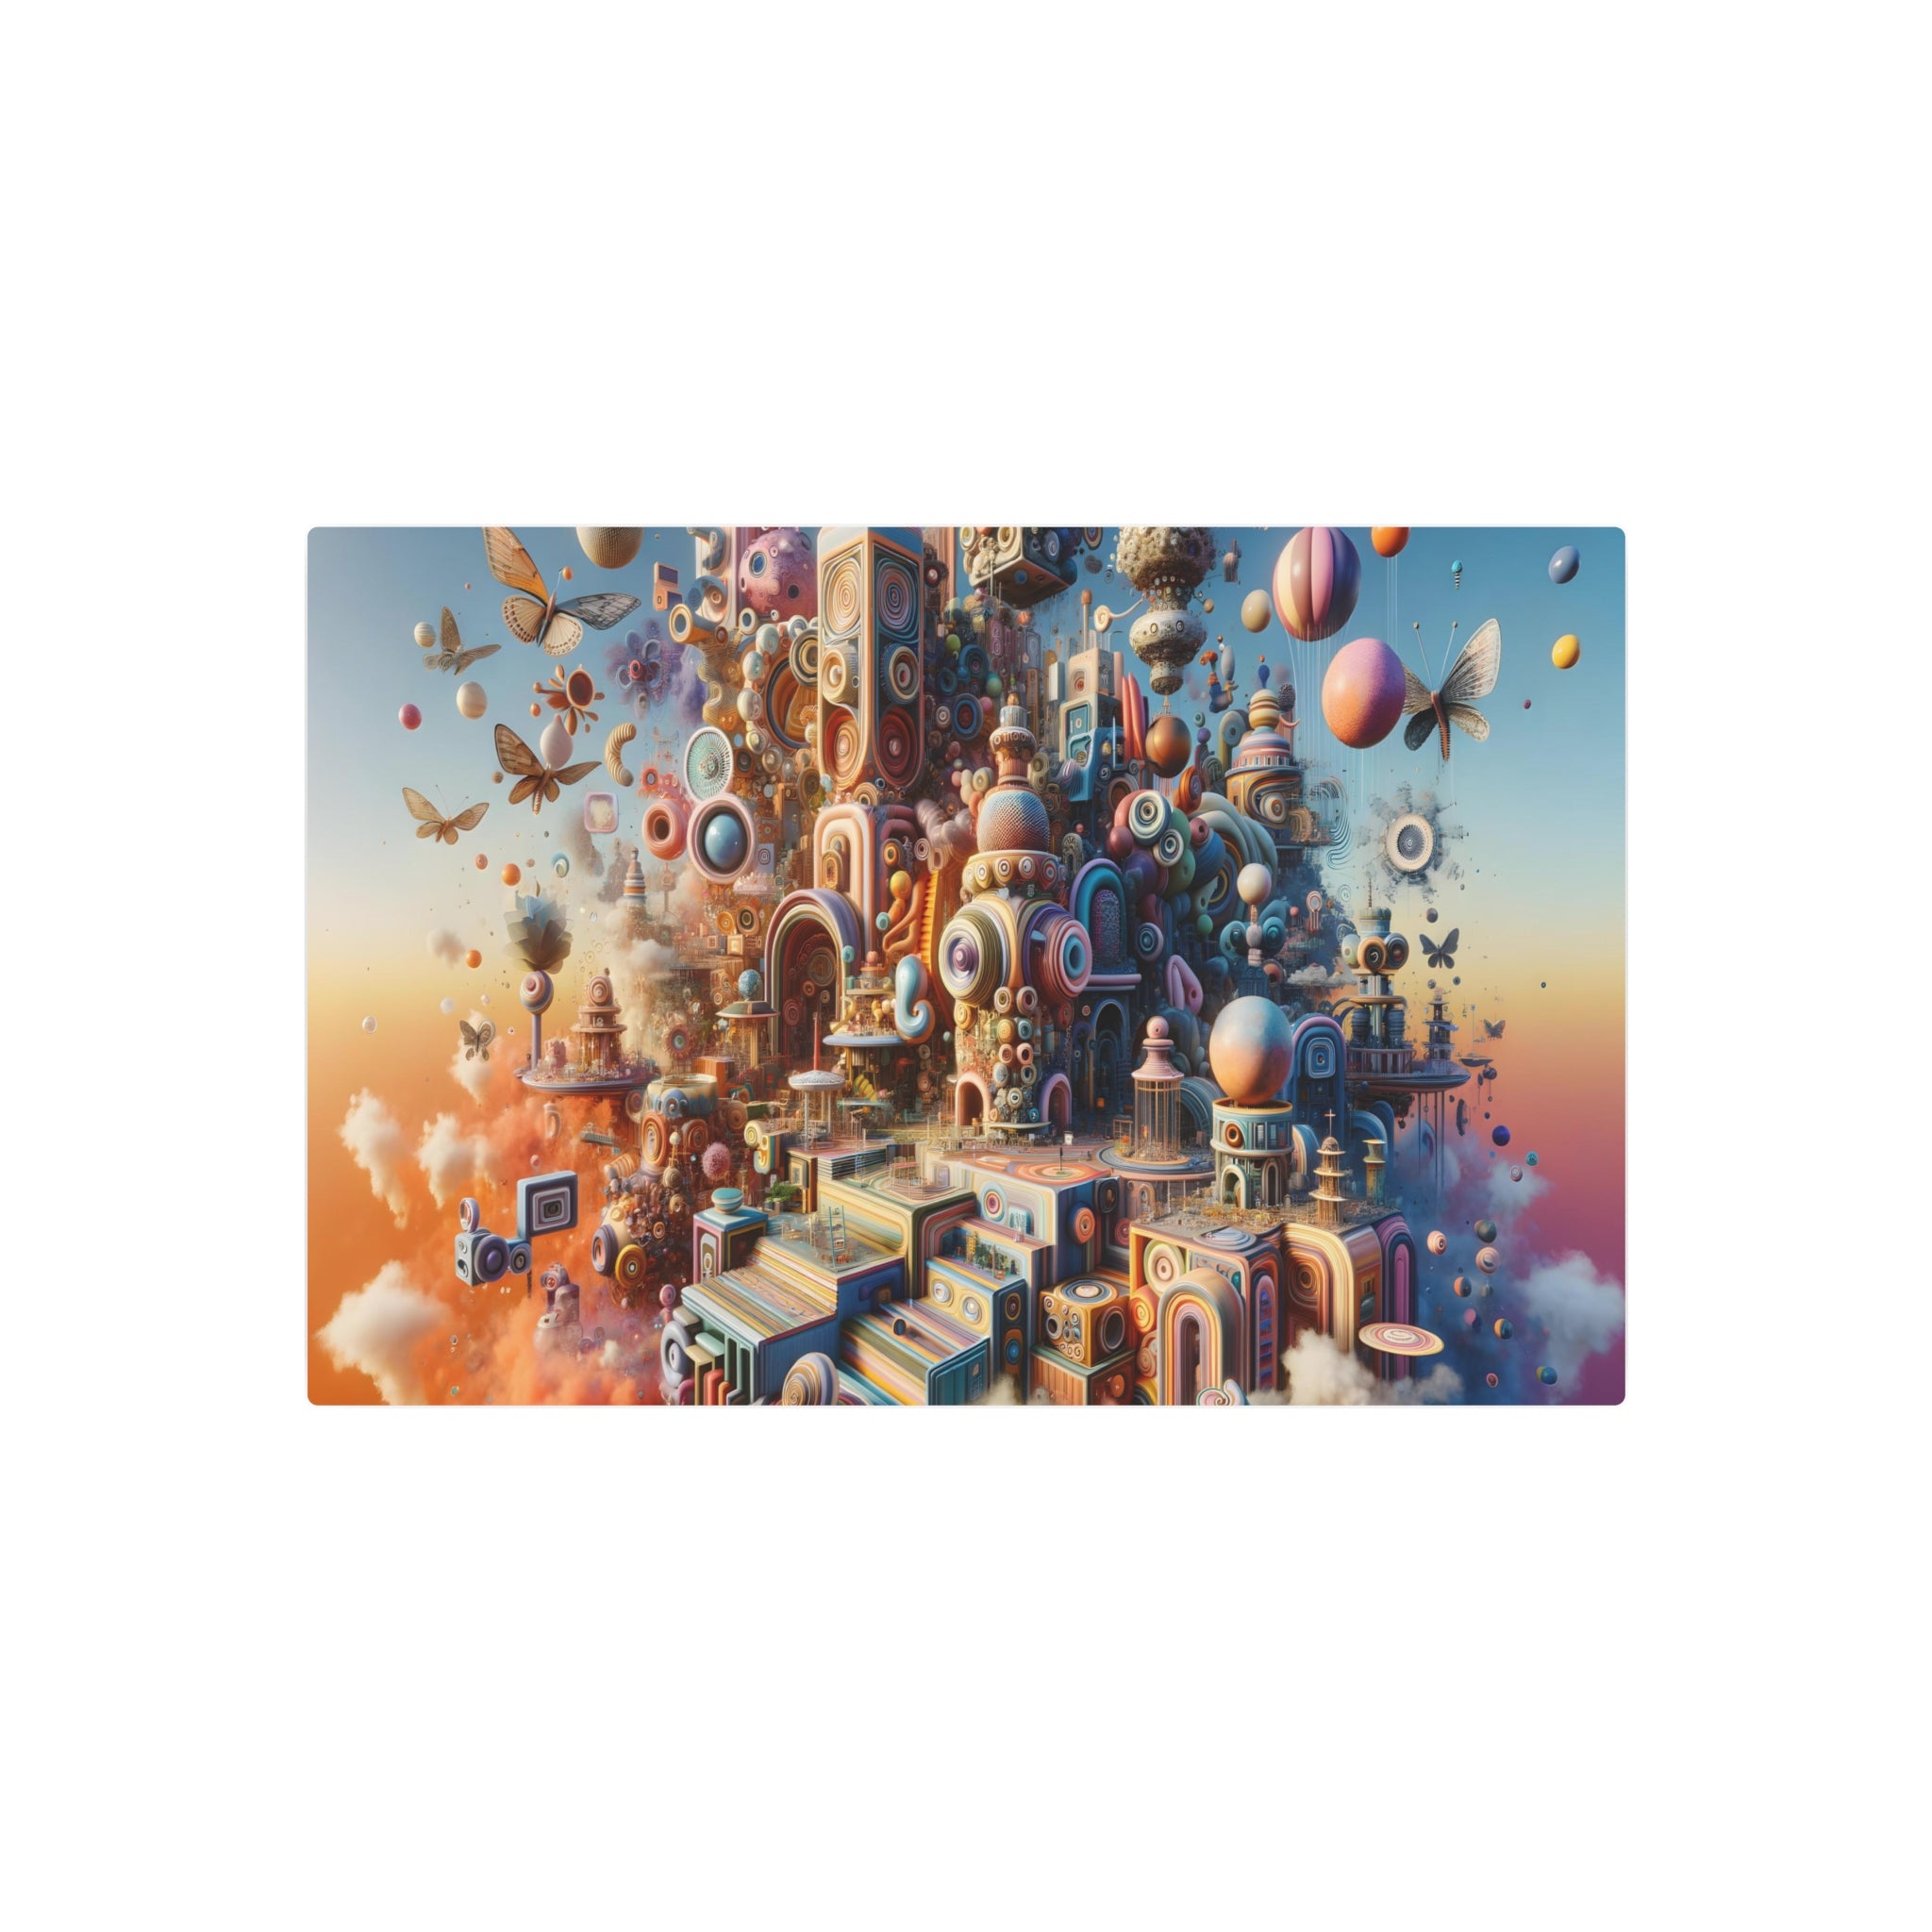 Metal Poster Art | "Whimsical Dreamlike Surreal Landscape Art - Vibrant Modern Contemporary Surrealism with Floating Objects & Impossible Structures"